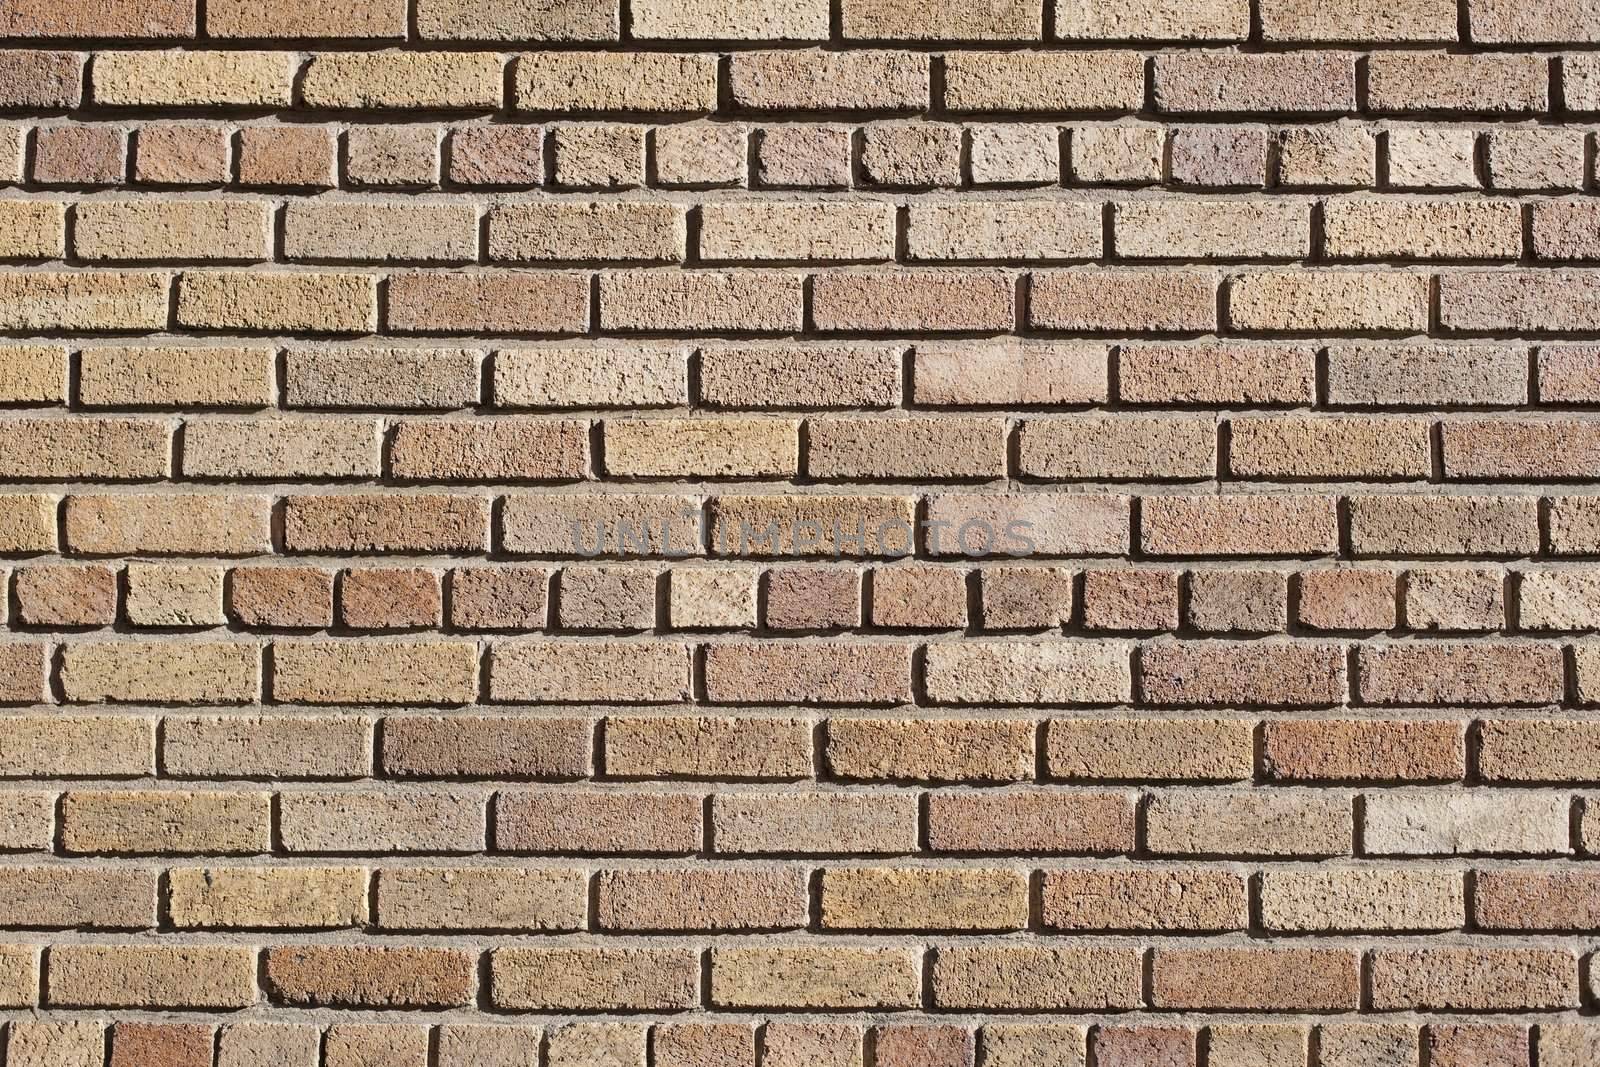 Several Rows of an Outside Brown Brick Wall